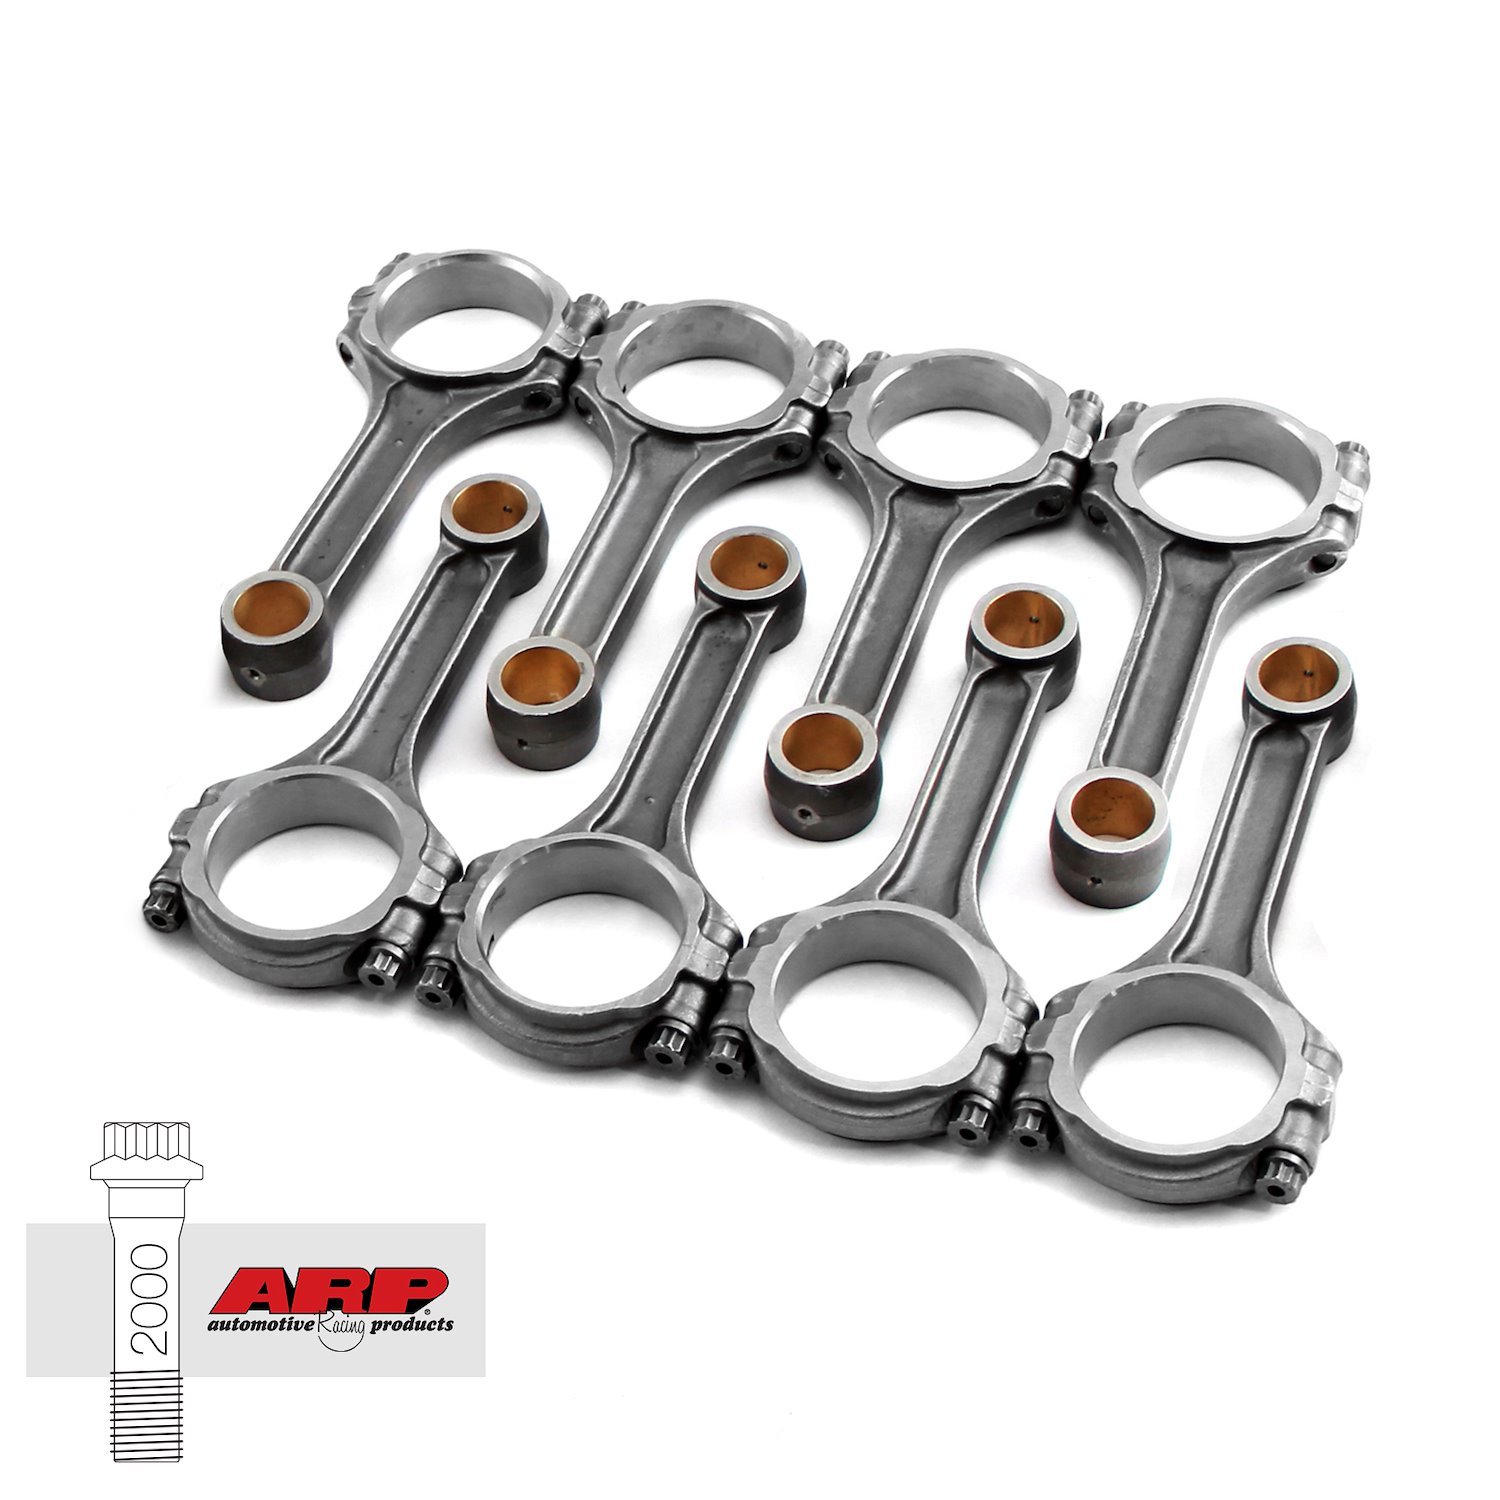 I BEAM 5.090 2.123 .912 5140 CONNECTING RODS FORD 302 WINDSOR W/ ARP 2000